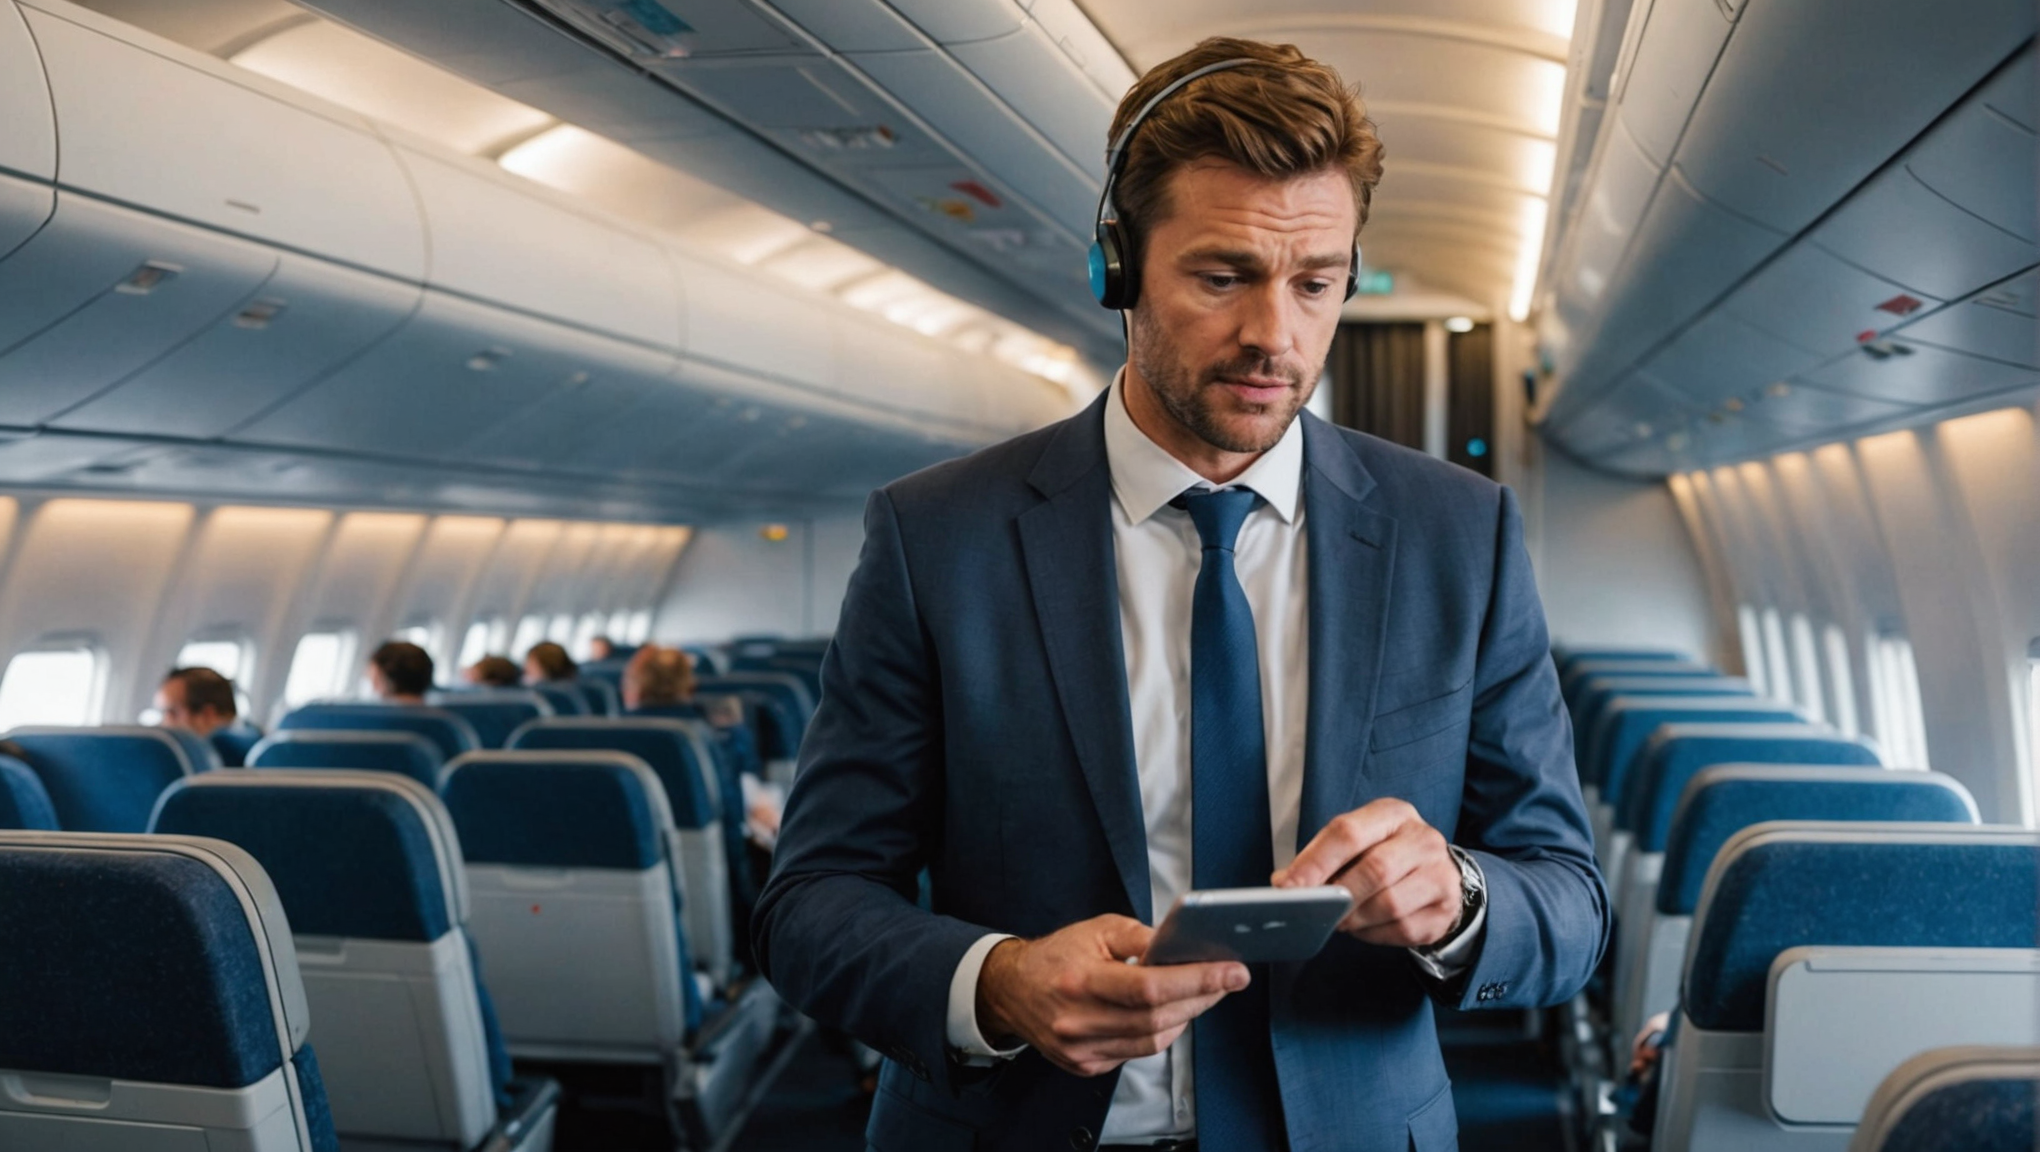 find out if this australian man truly executed a wi-fi scam on domestic flights and uncover the details of the suspected incident.